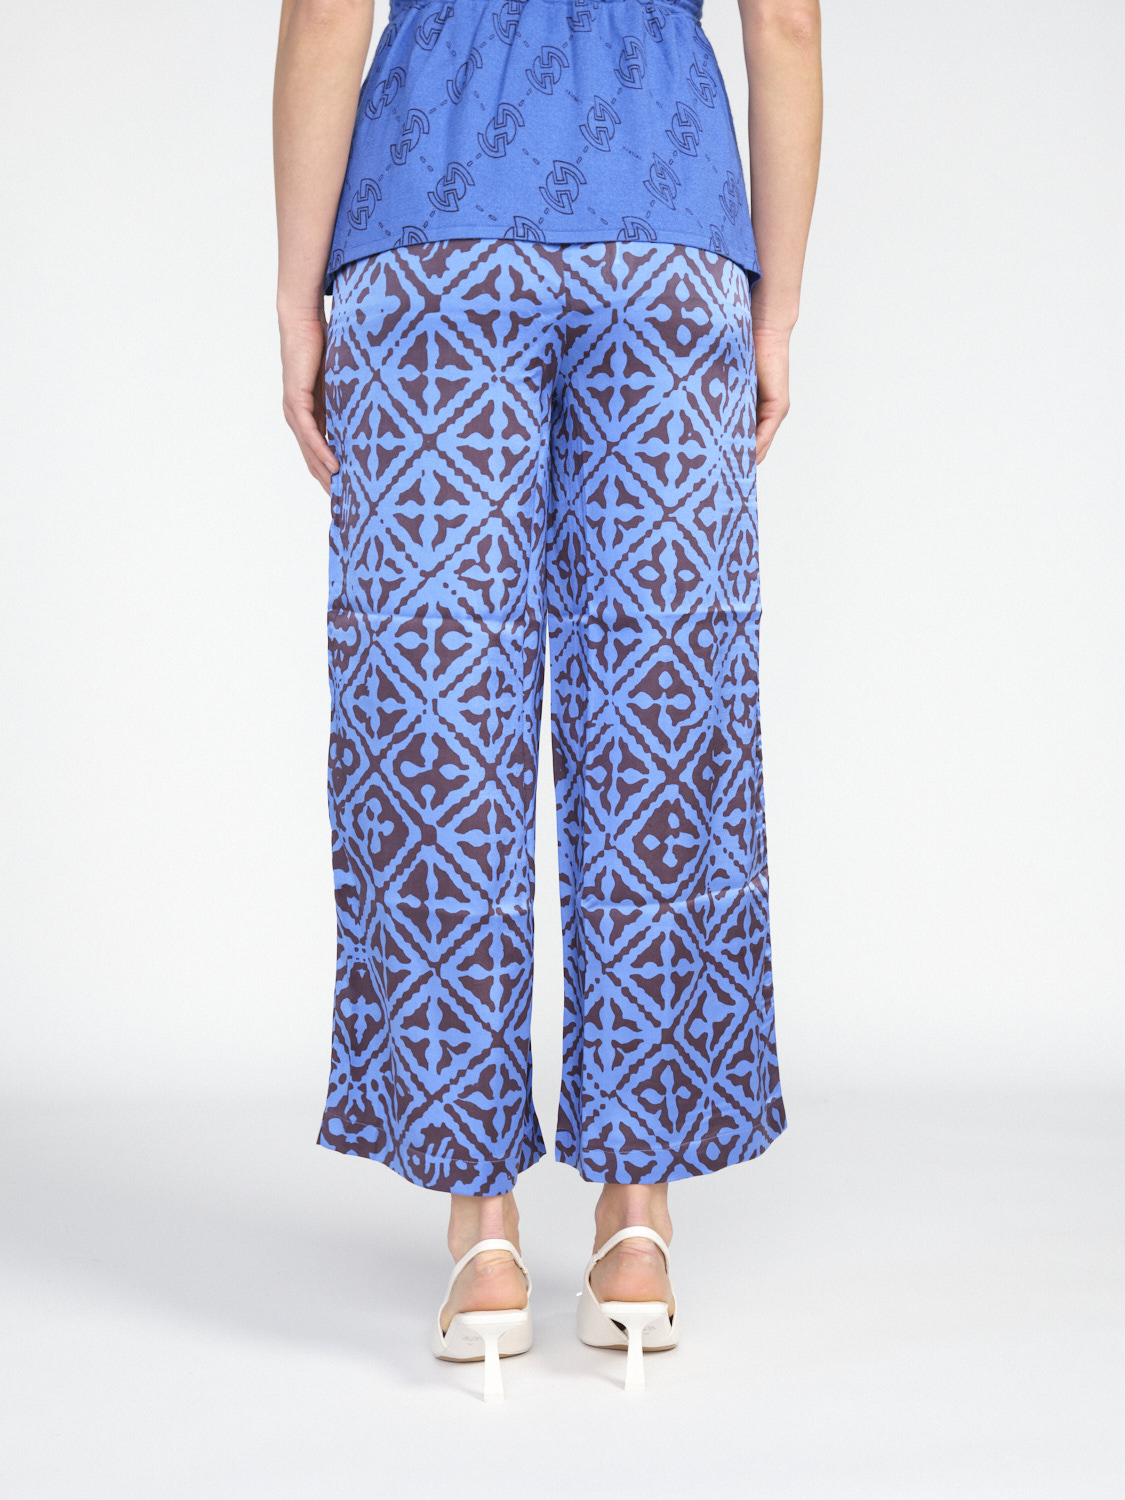 friendly hunting Baja – Stretchy silk trousers with a graphic pattern  blue XS